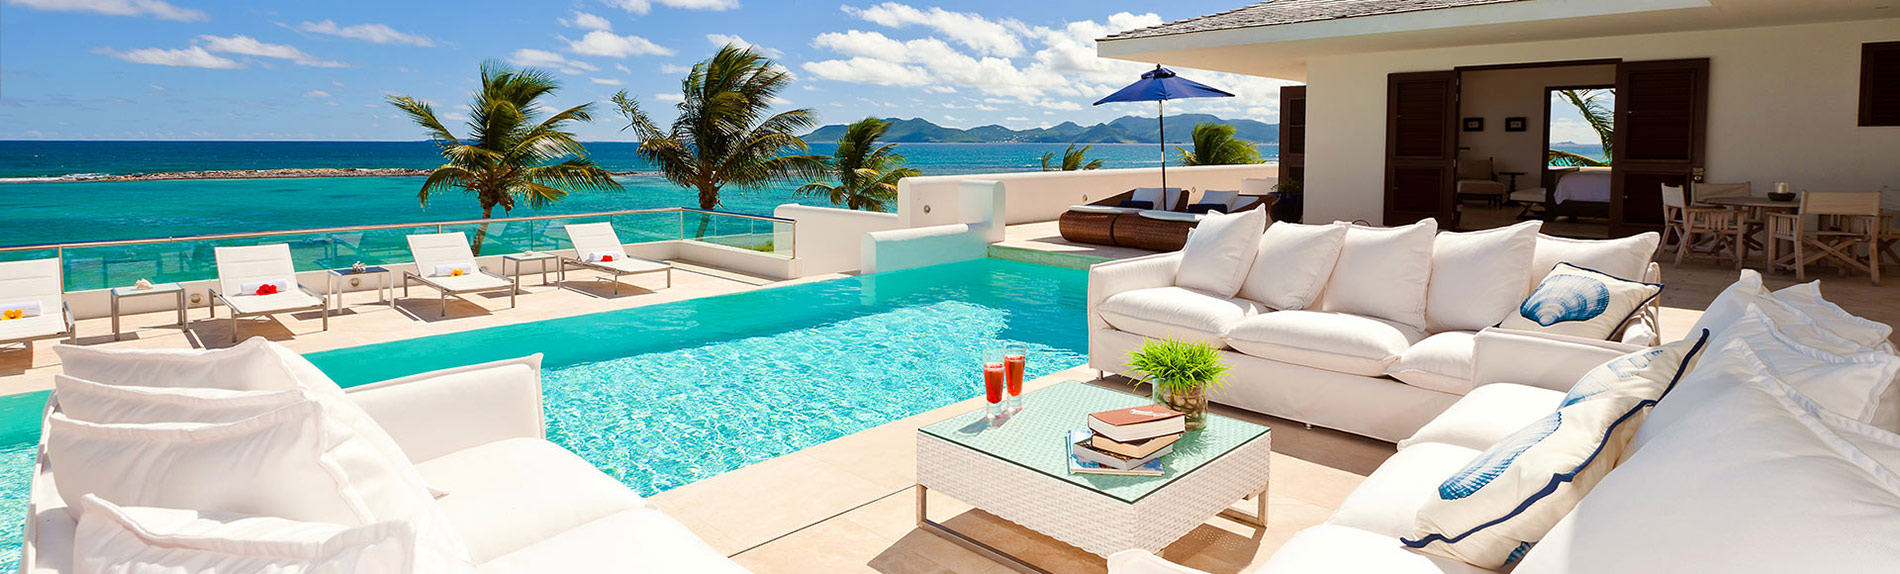 Call Properties in Paradise to learn more about Le Bleu Villa, a gorgeous Anguilla island luxury villa rental
